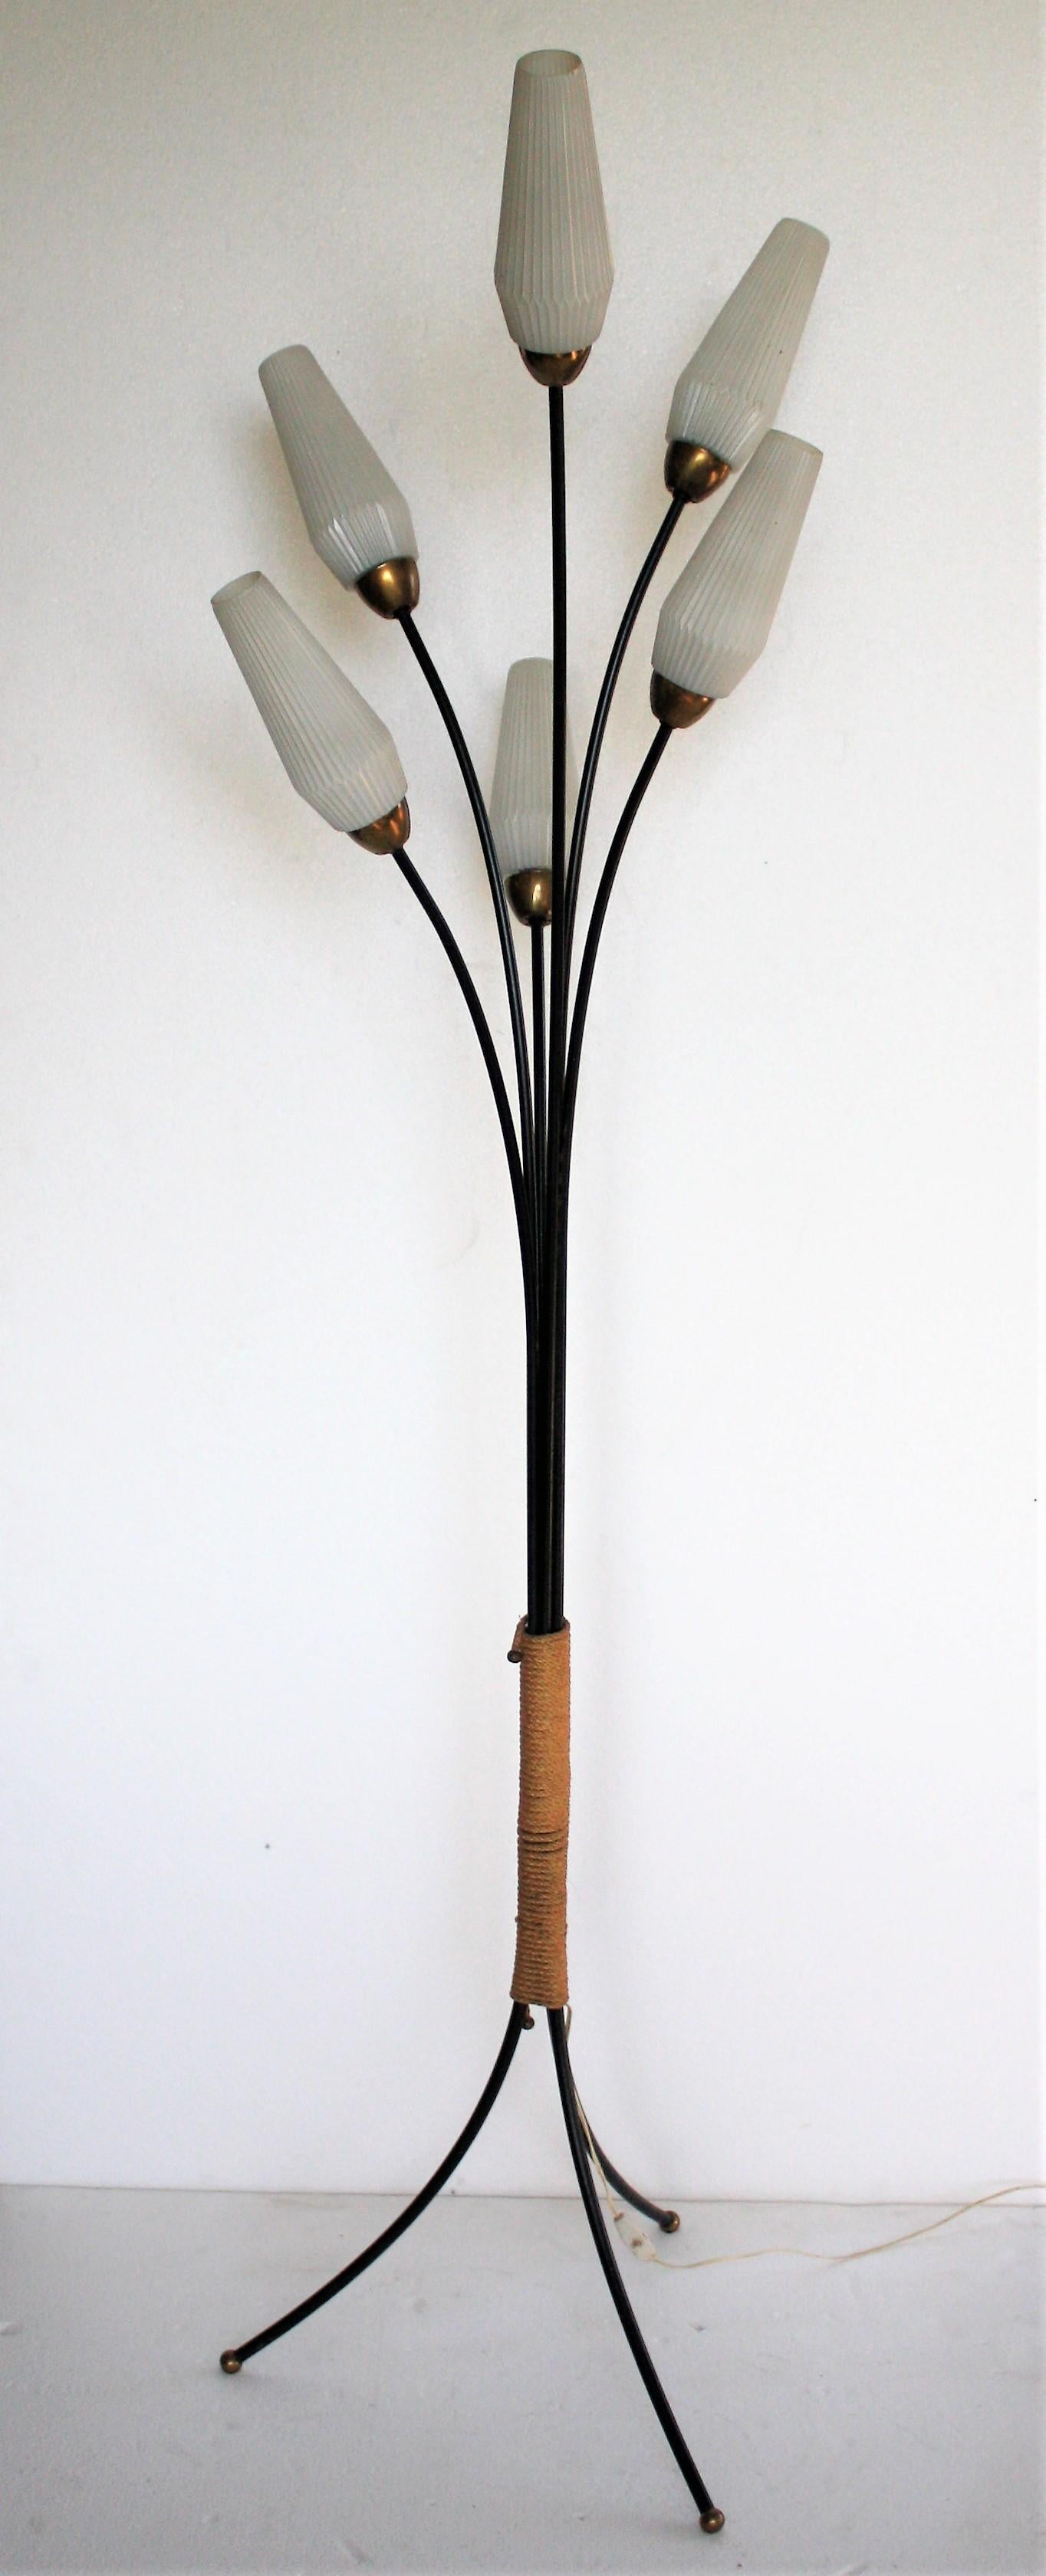 Elegant flower like black metal floor lamp with six ribbled white glass lamp shades.

Typical and charming fifties design.

The lamp has brass shade holders and brass feet and comes with the original 'cord' decoration in the centre.

Perfect